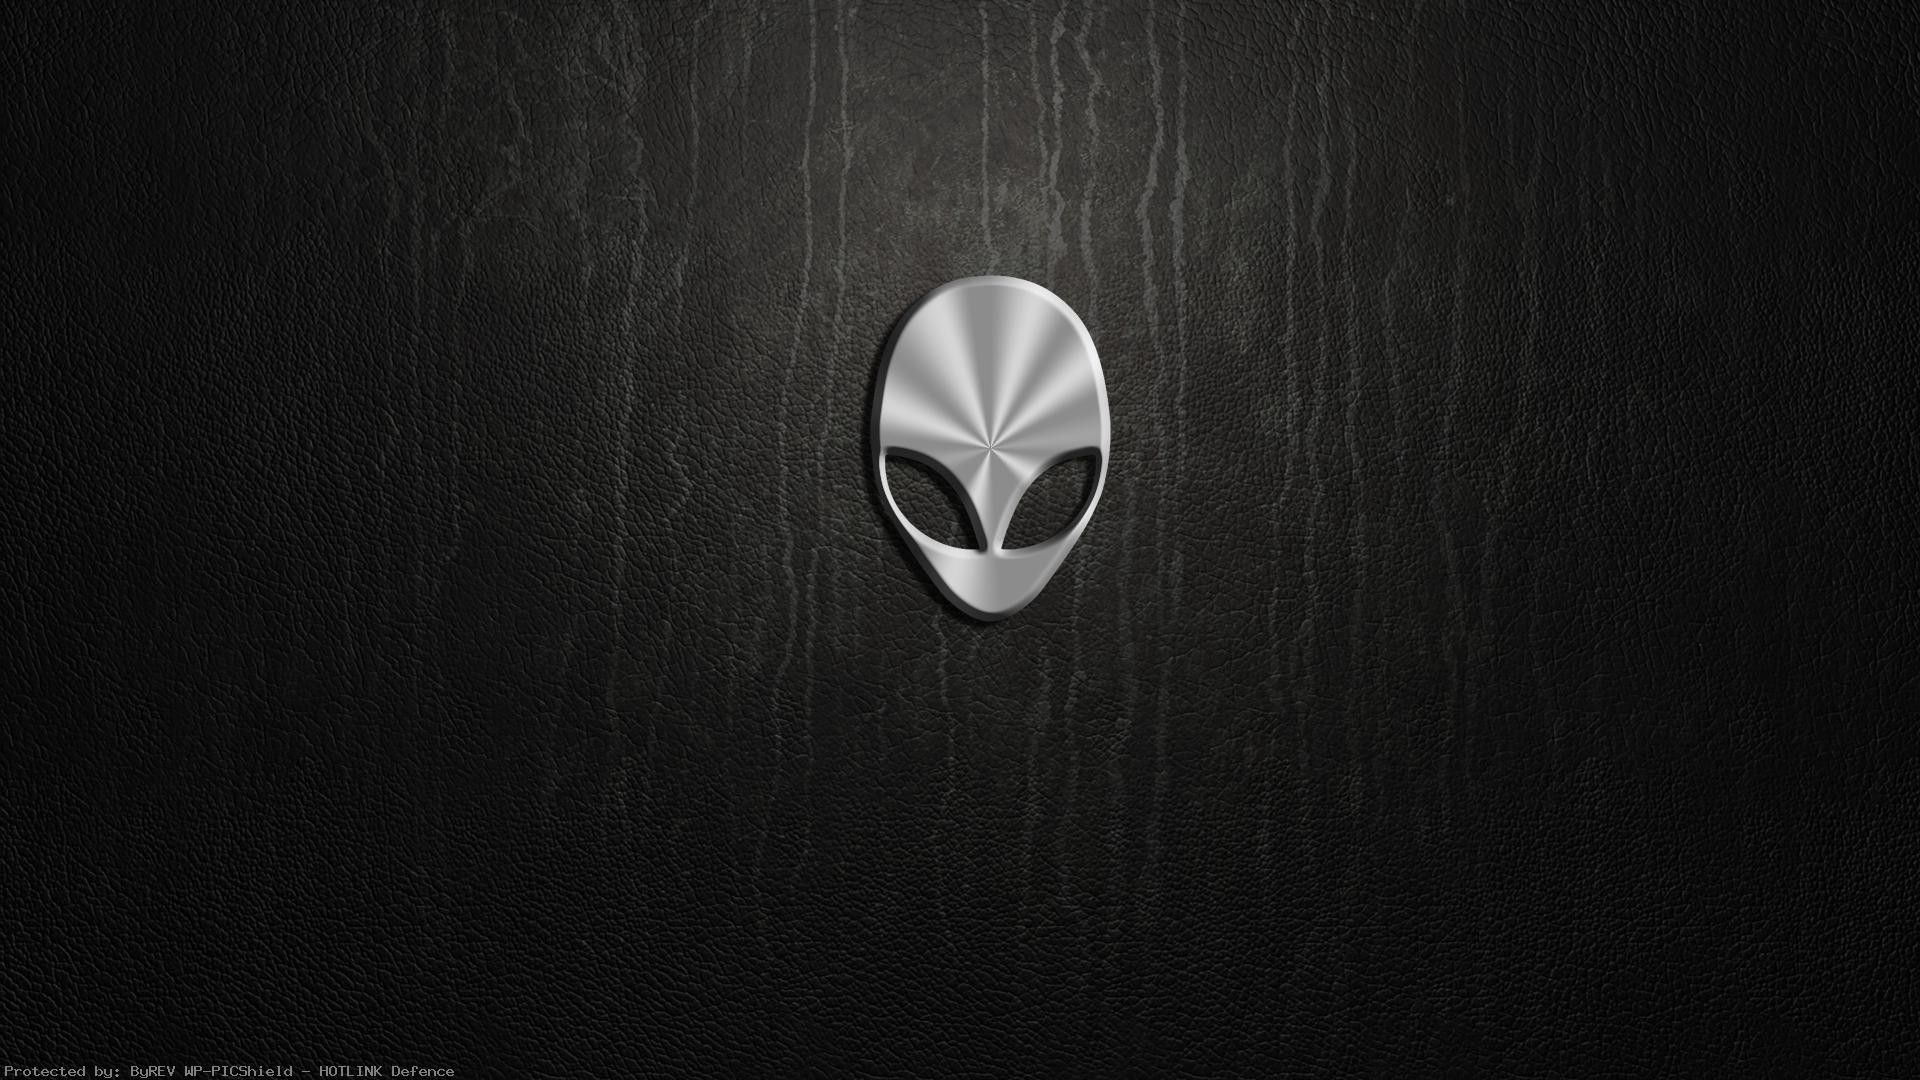 Alienware Official Wallpapers on